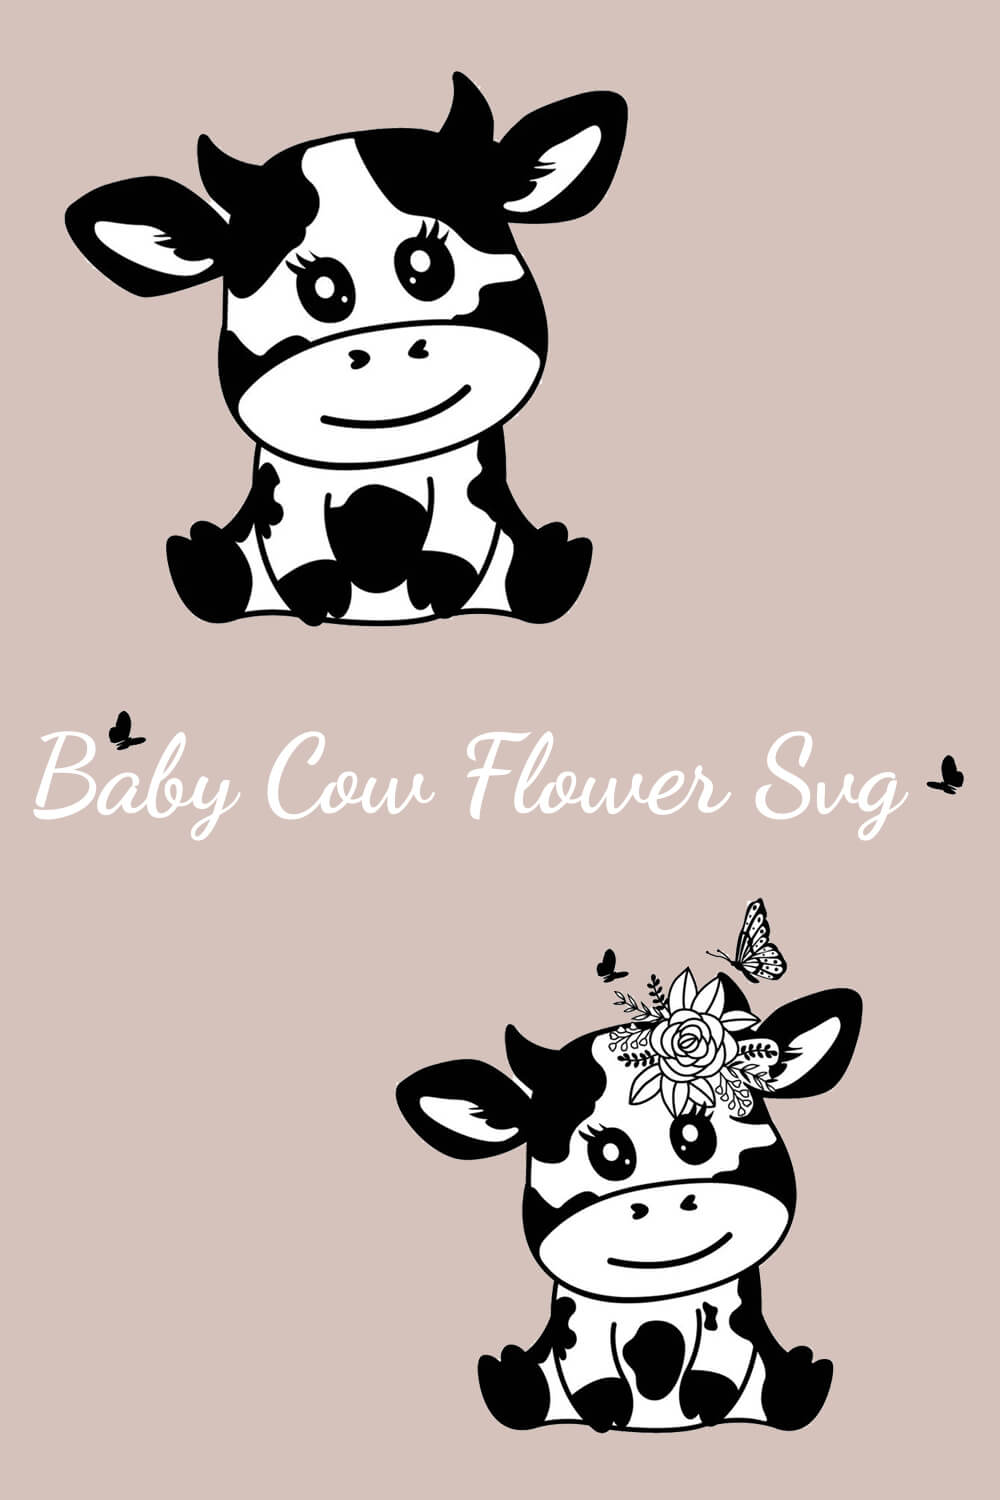 Cow with a flower on its head sitting next to another cow.